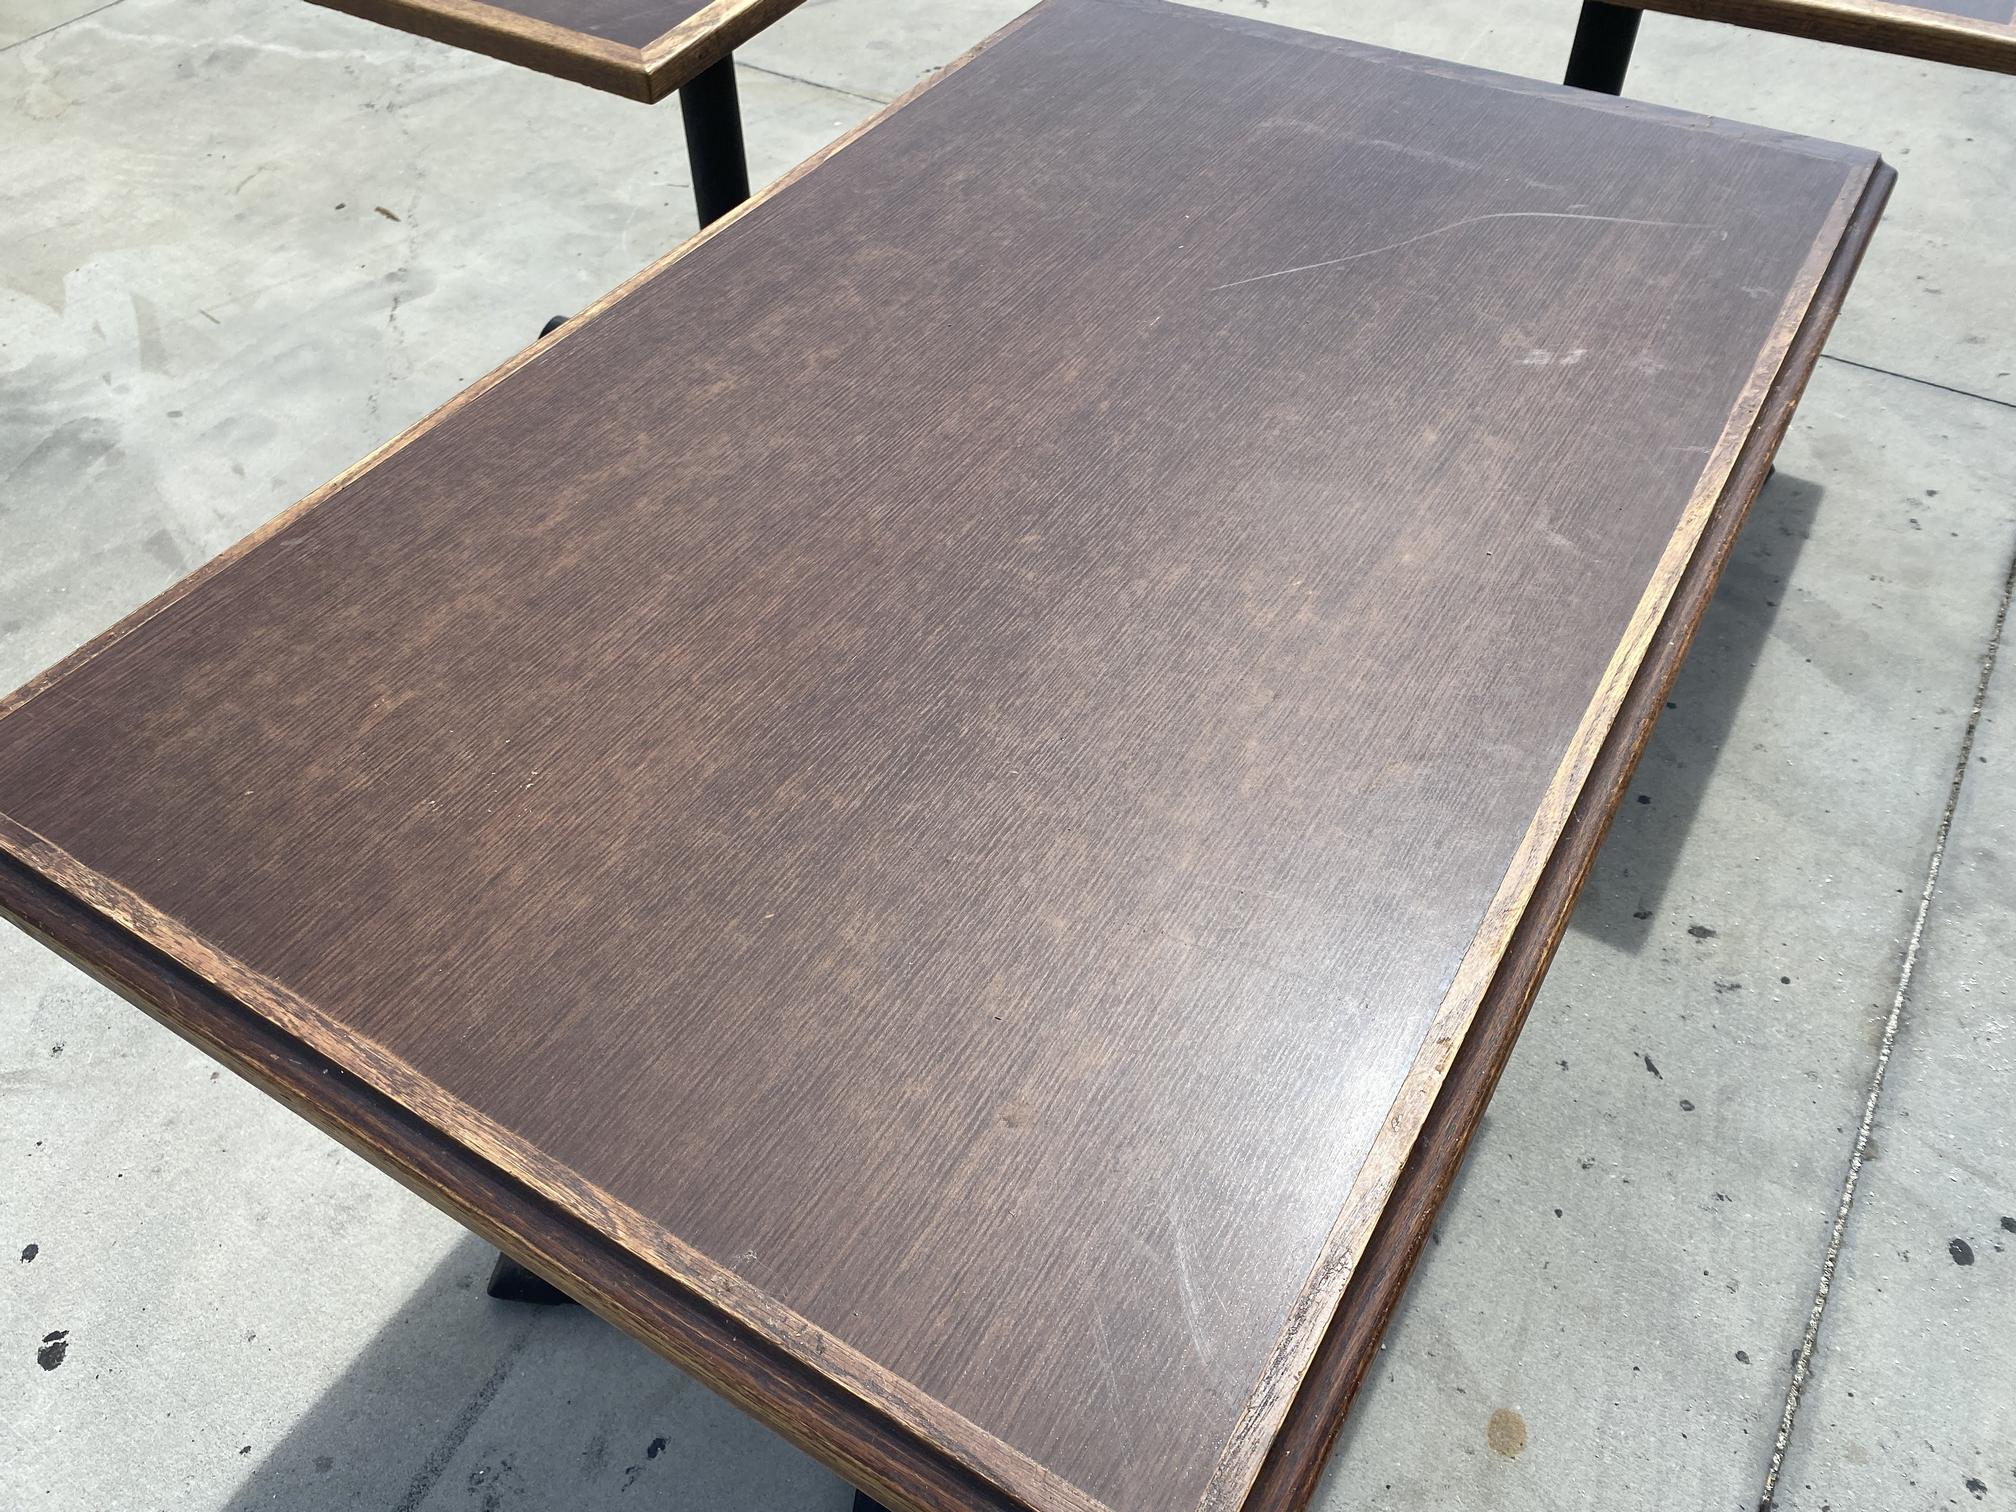 48" by 36" Heavy Wood Table W/ Base - Restaurant Seating